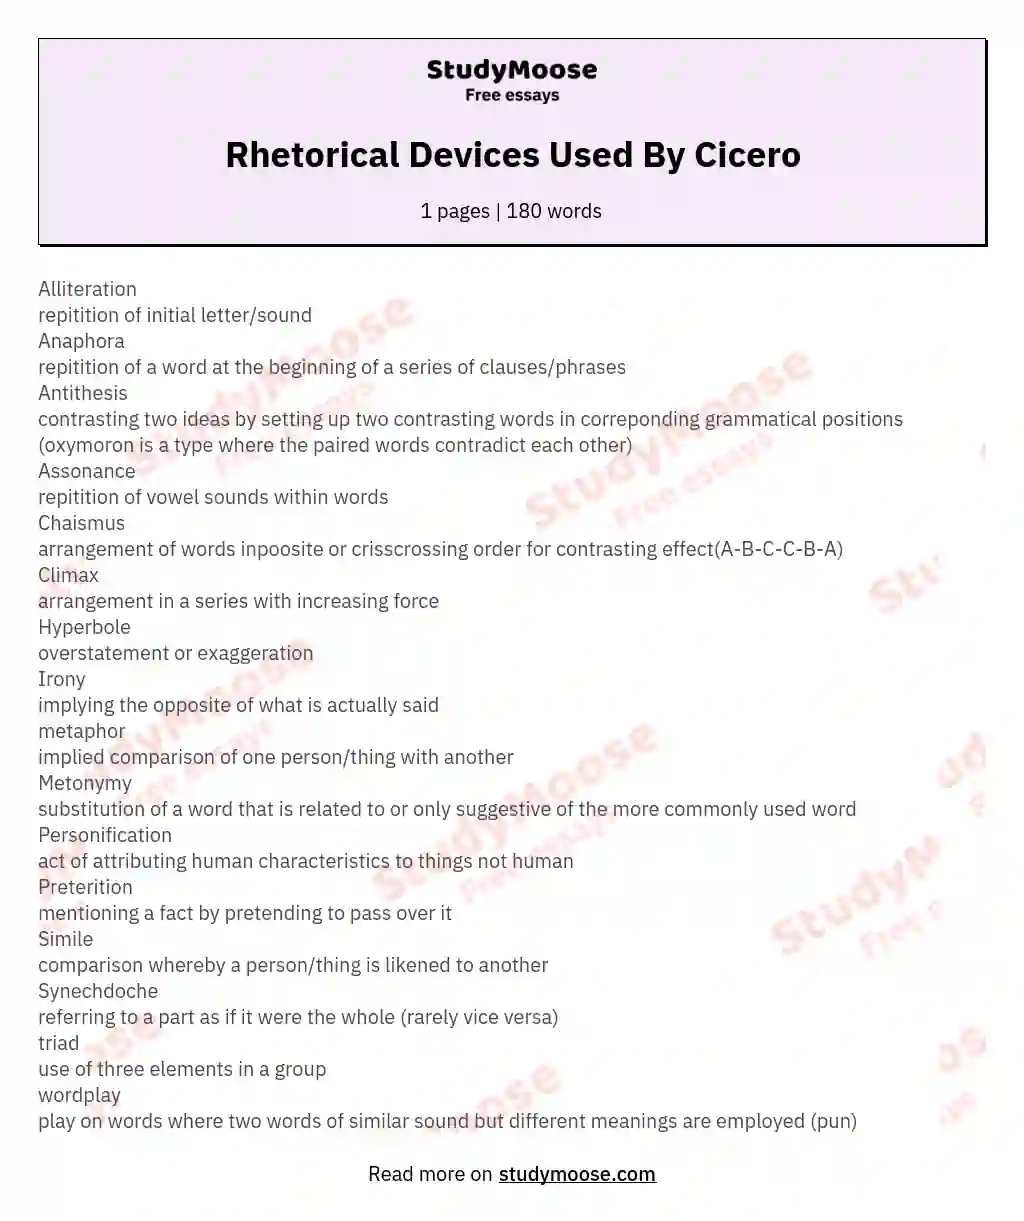 Rhetorical Devices Used By Cicero